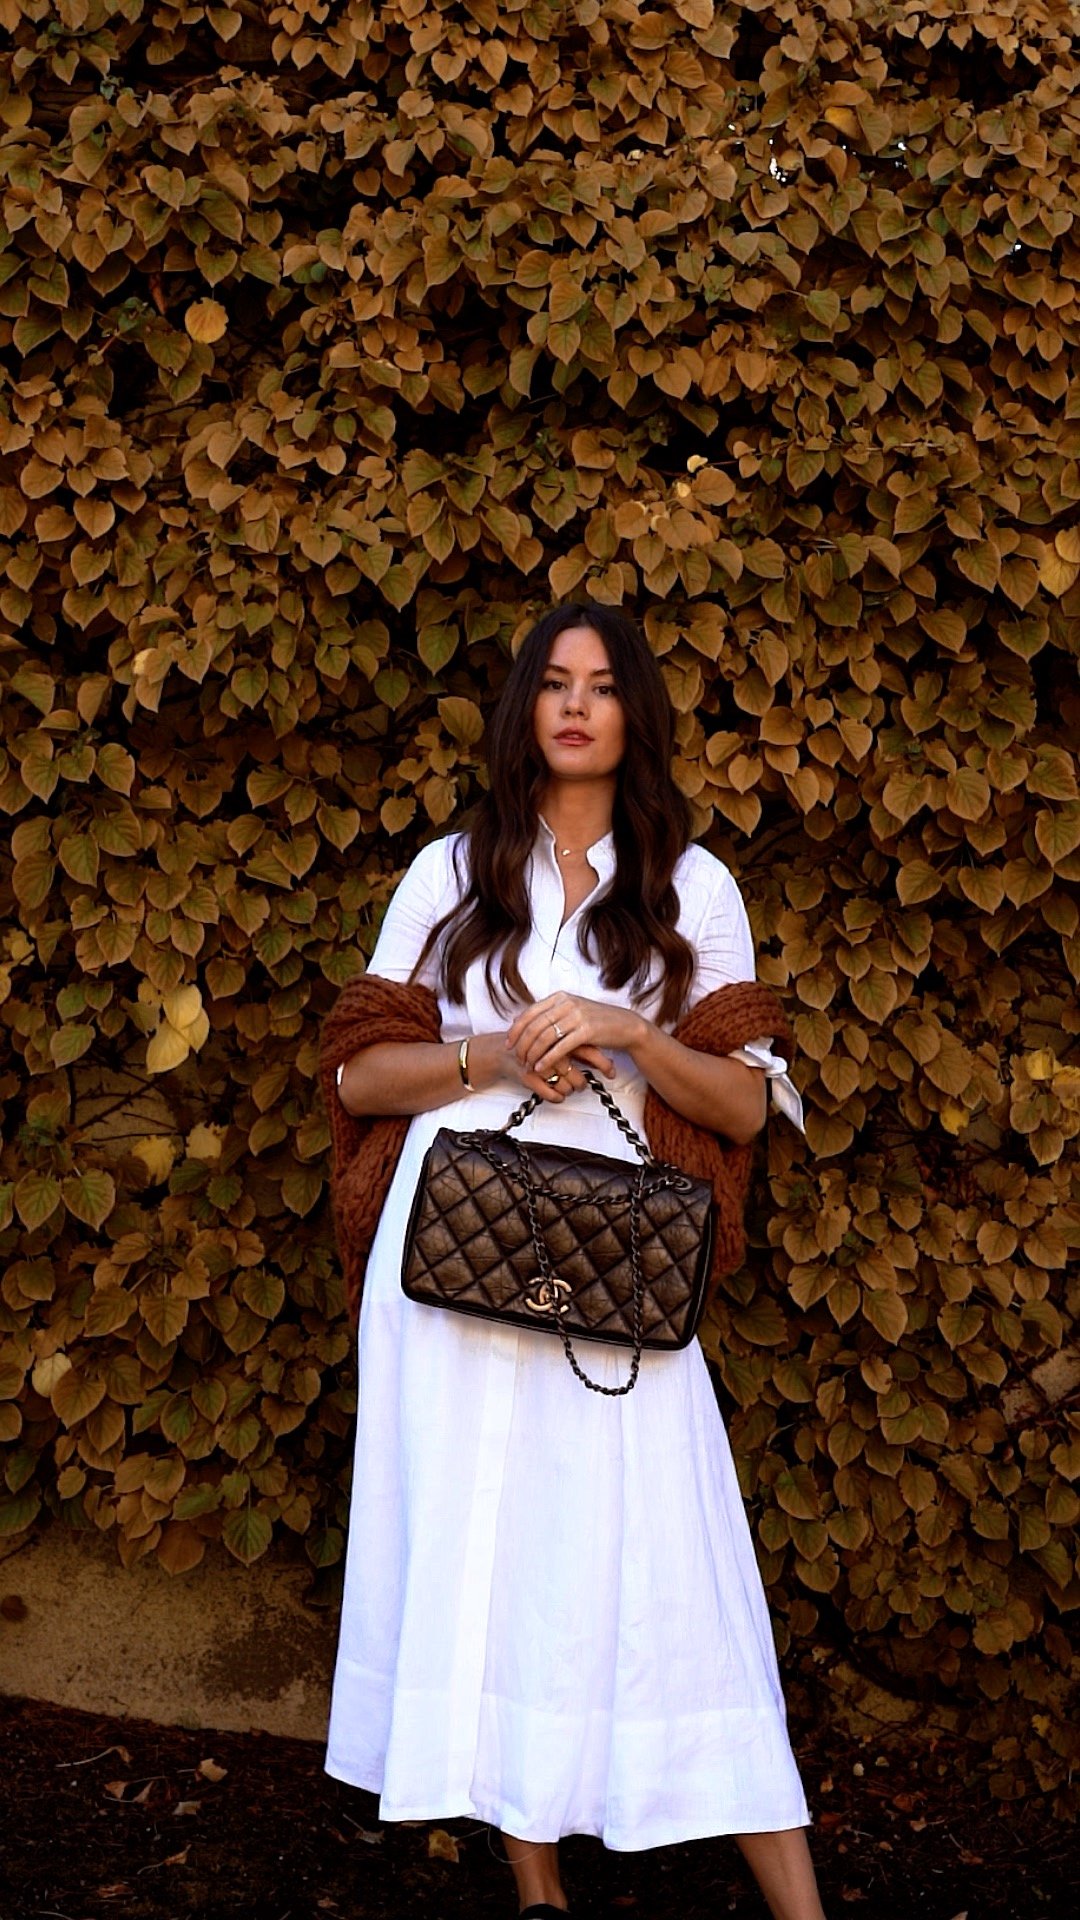 Parisian Style Fall Chic Outfits, Warm fall Outfits, Fall Brunch Outfit. @sarahchristine wearing white midi dress with brown sweater and Chanel bag outfit -3.jpg